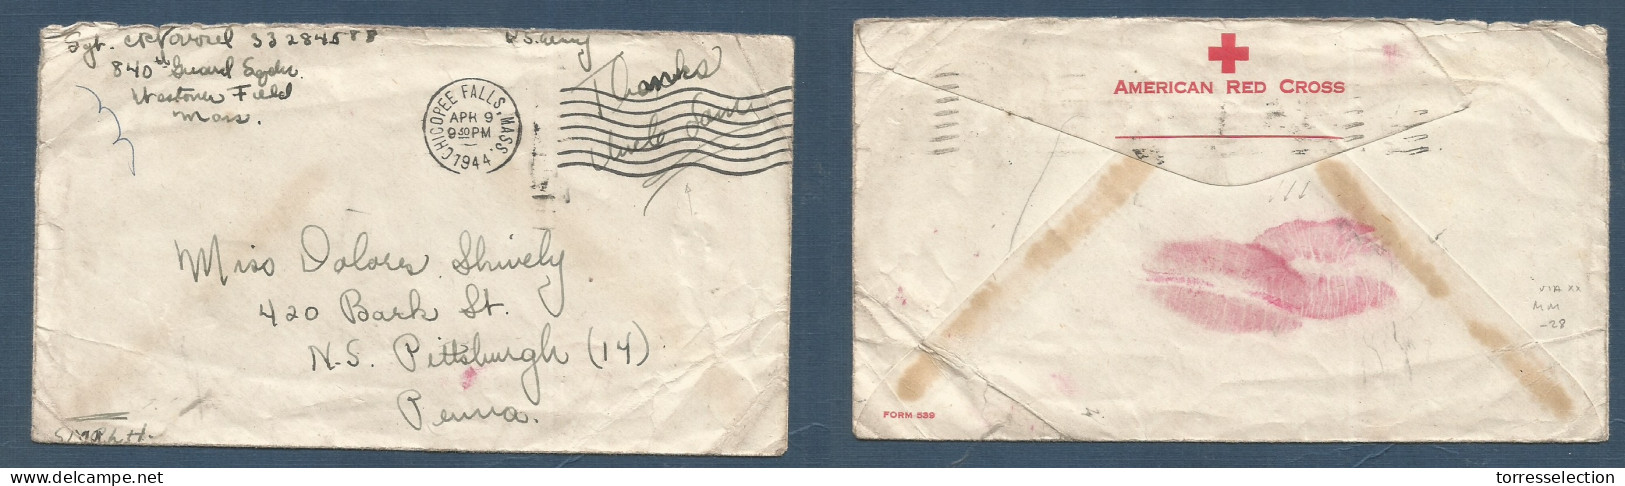 MILITARY MAIL. 1944 (9 Apr) WWI. American Red Cross. Chicago Falls - Pittsburg, PA. FM Envelope Mns "Thanks Undesam" XSA - Military Mail (PM)